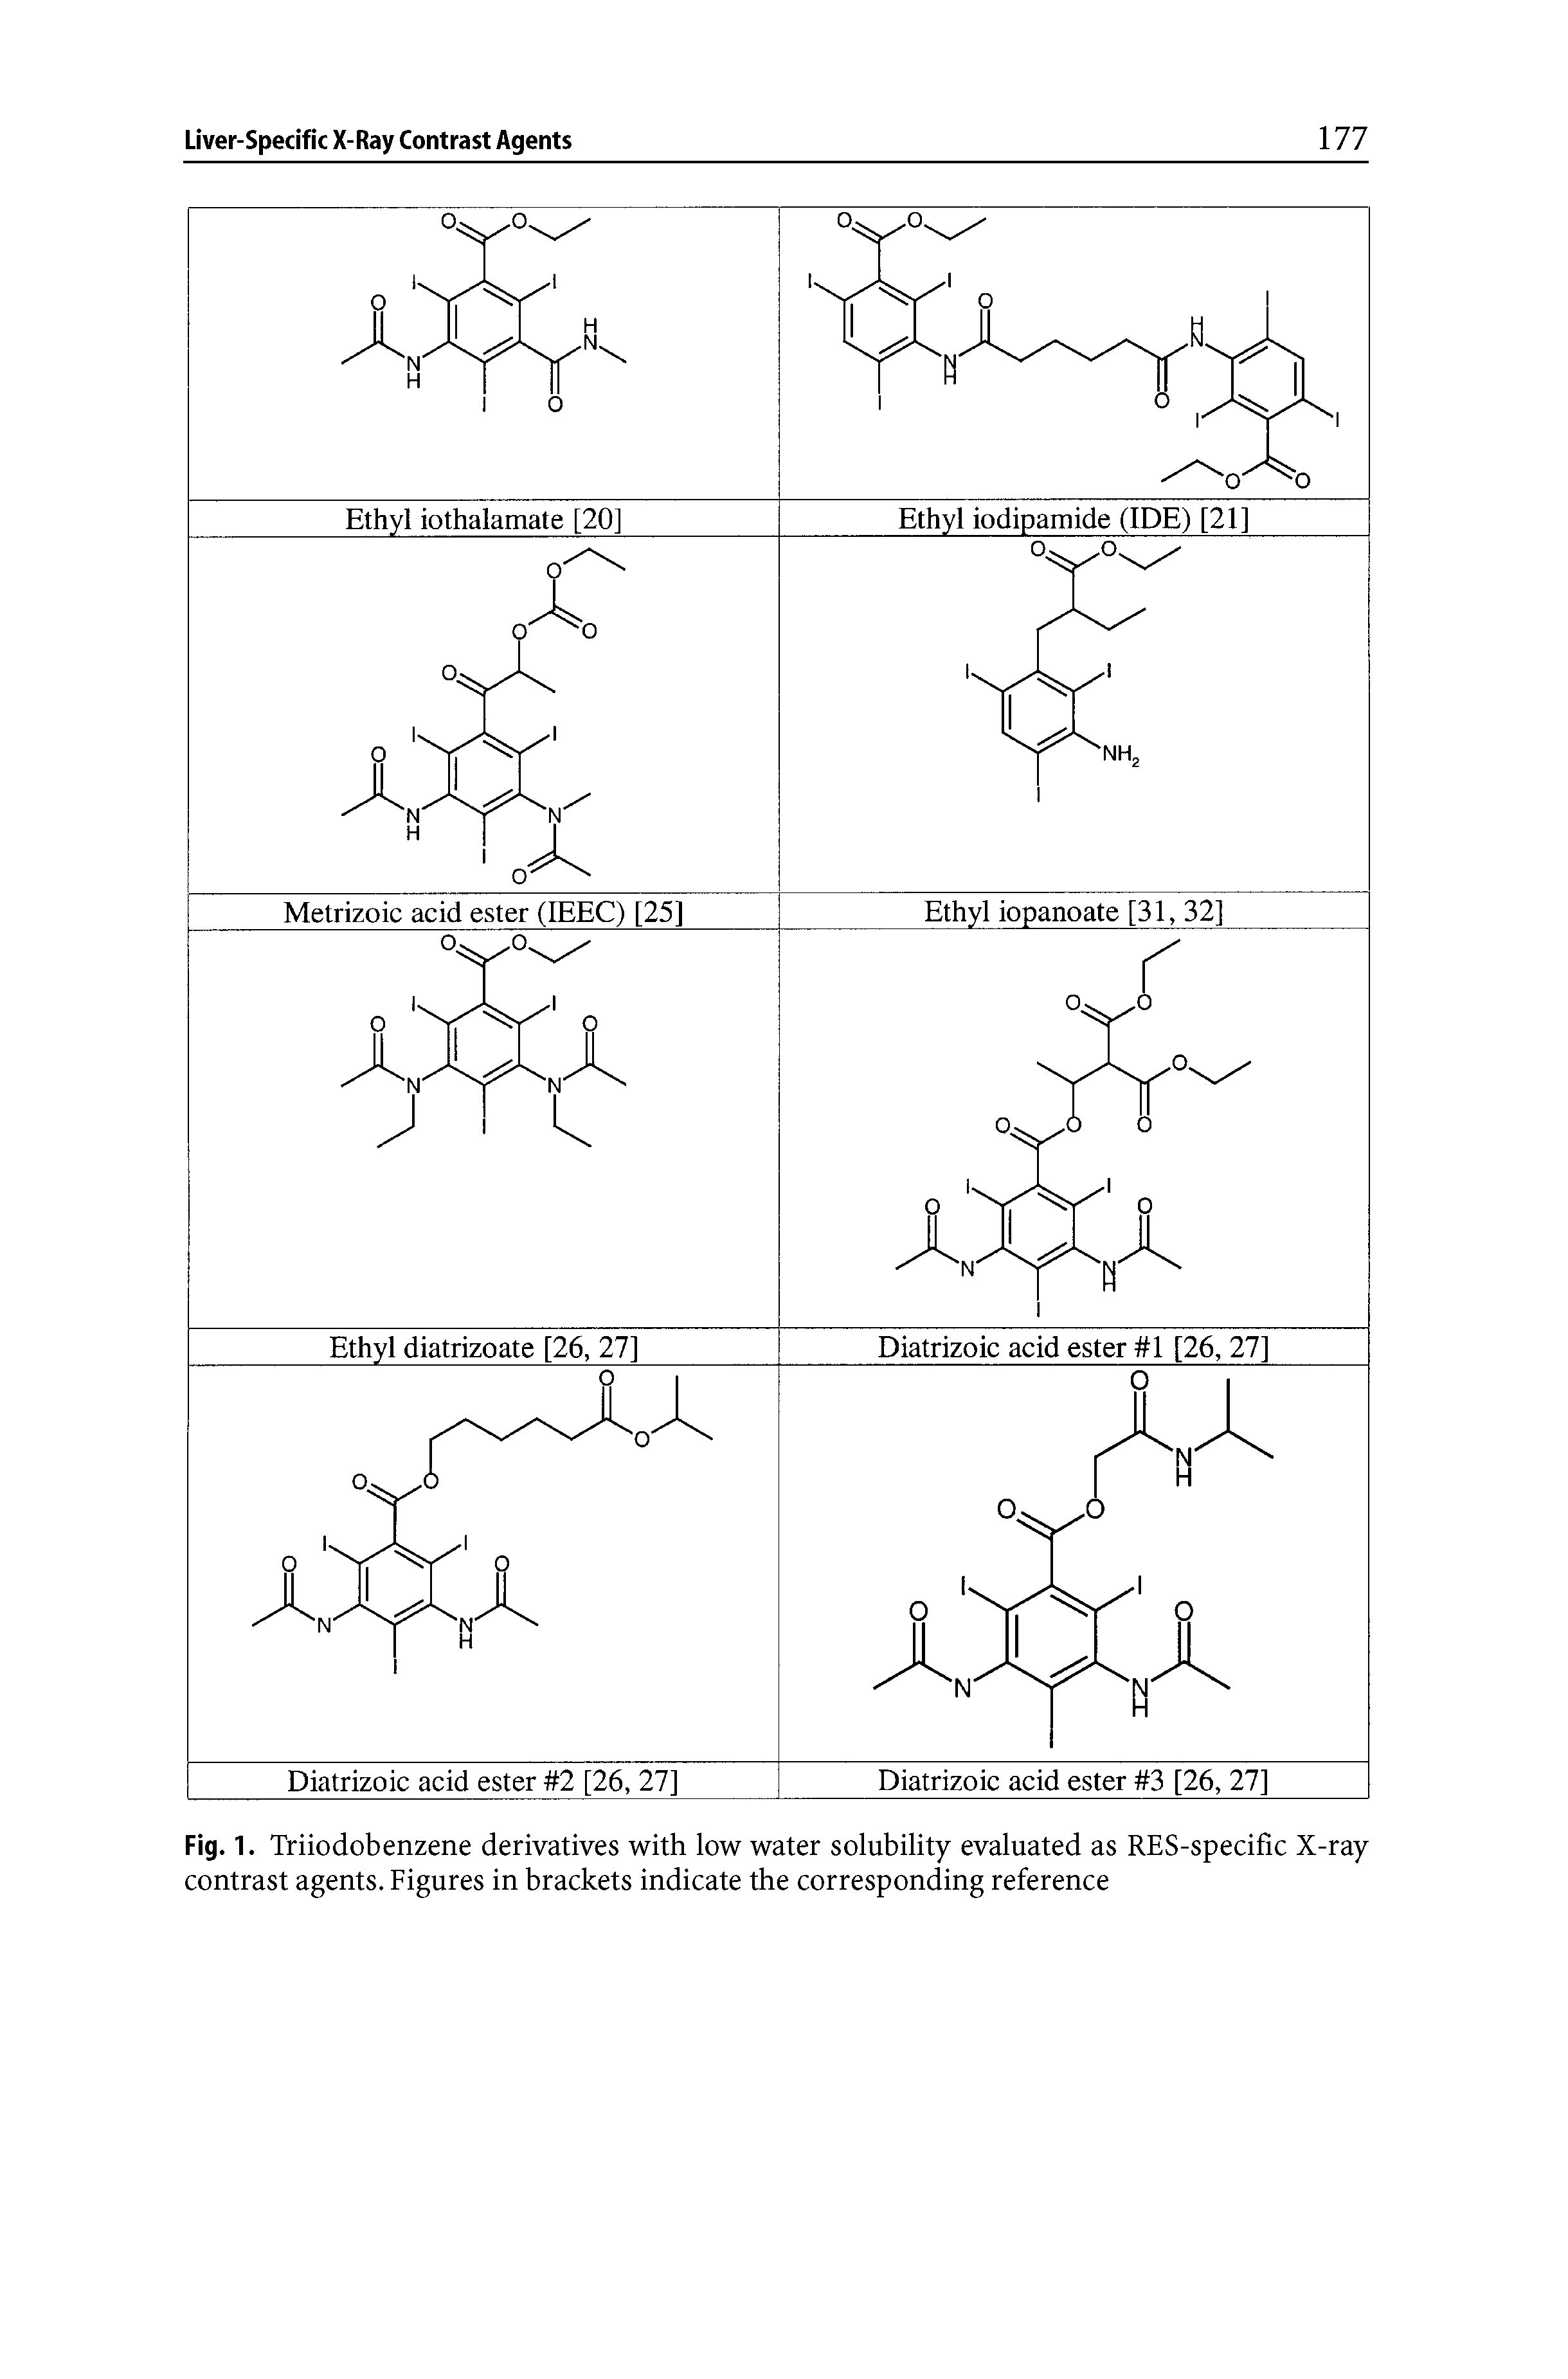 Fig. 1. Triiodobenzene derivatives with low water solubility evaluated as RES-spedfic X-ray contrast agents. Figures in brackets indicate the corresponding reference...